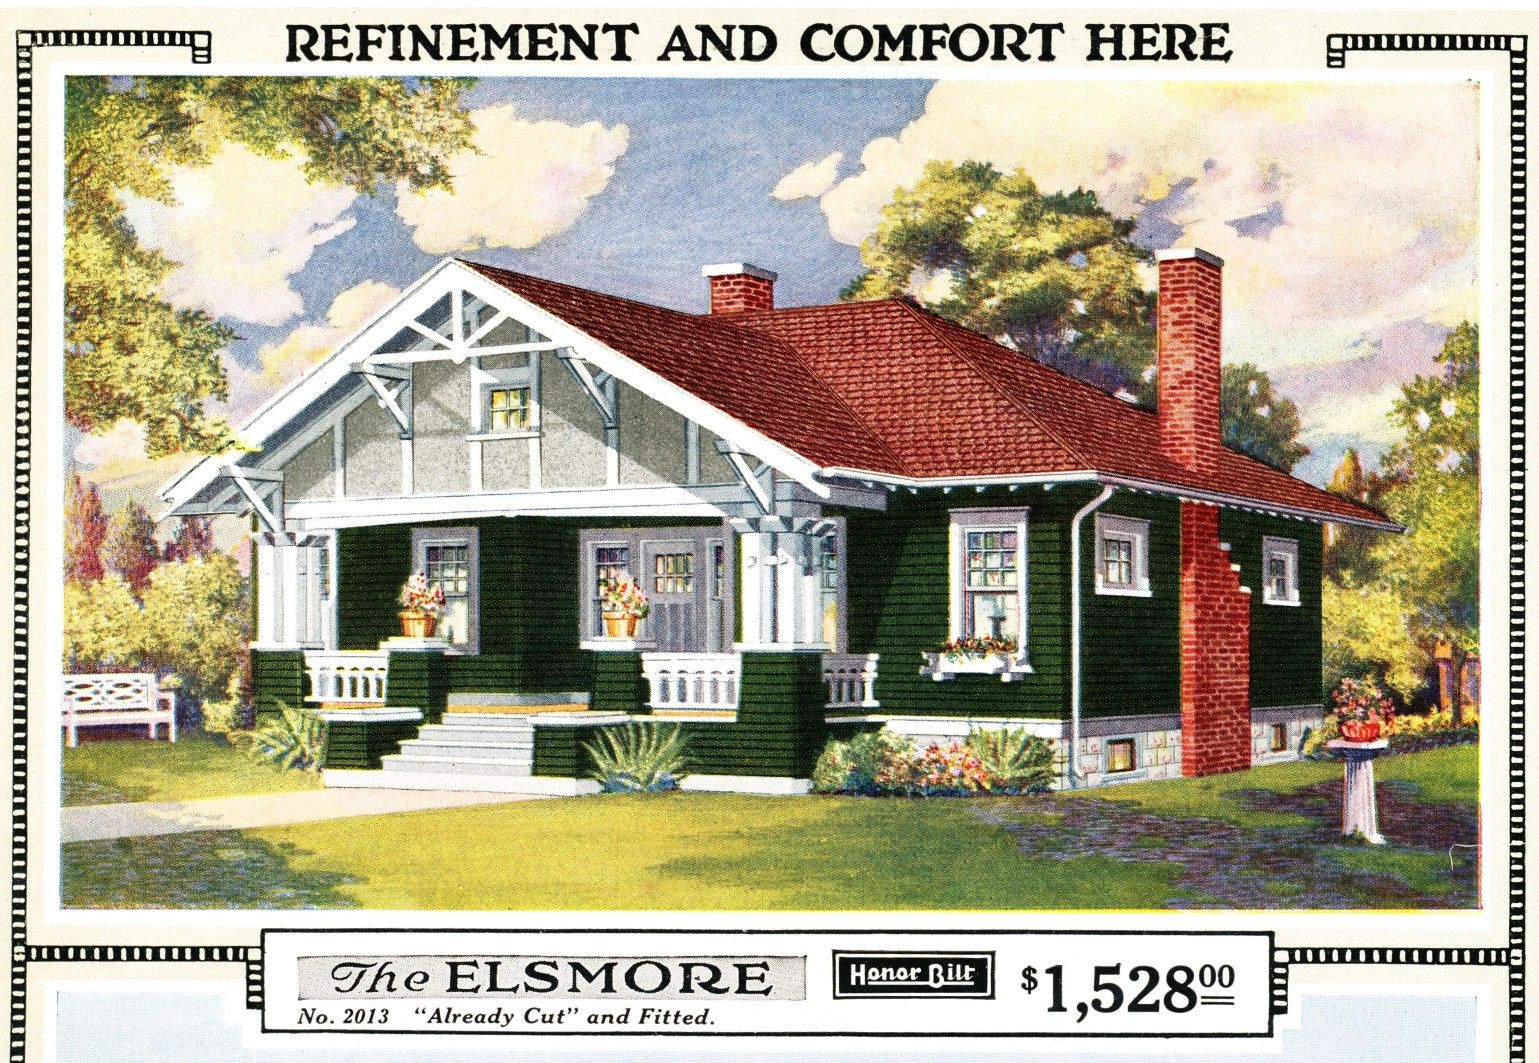 Sears Elsmore, from the 1919 catalog